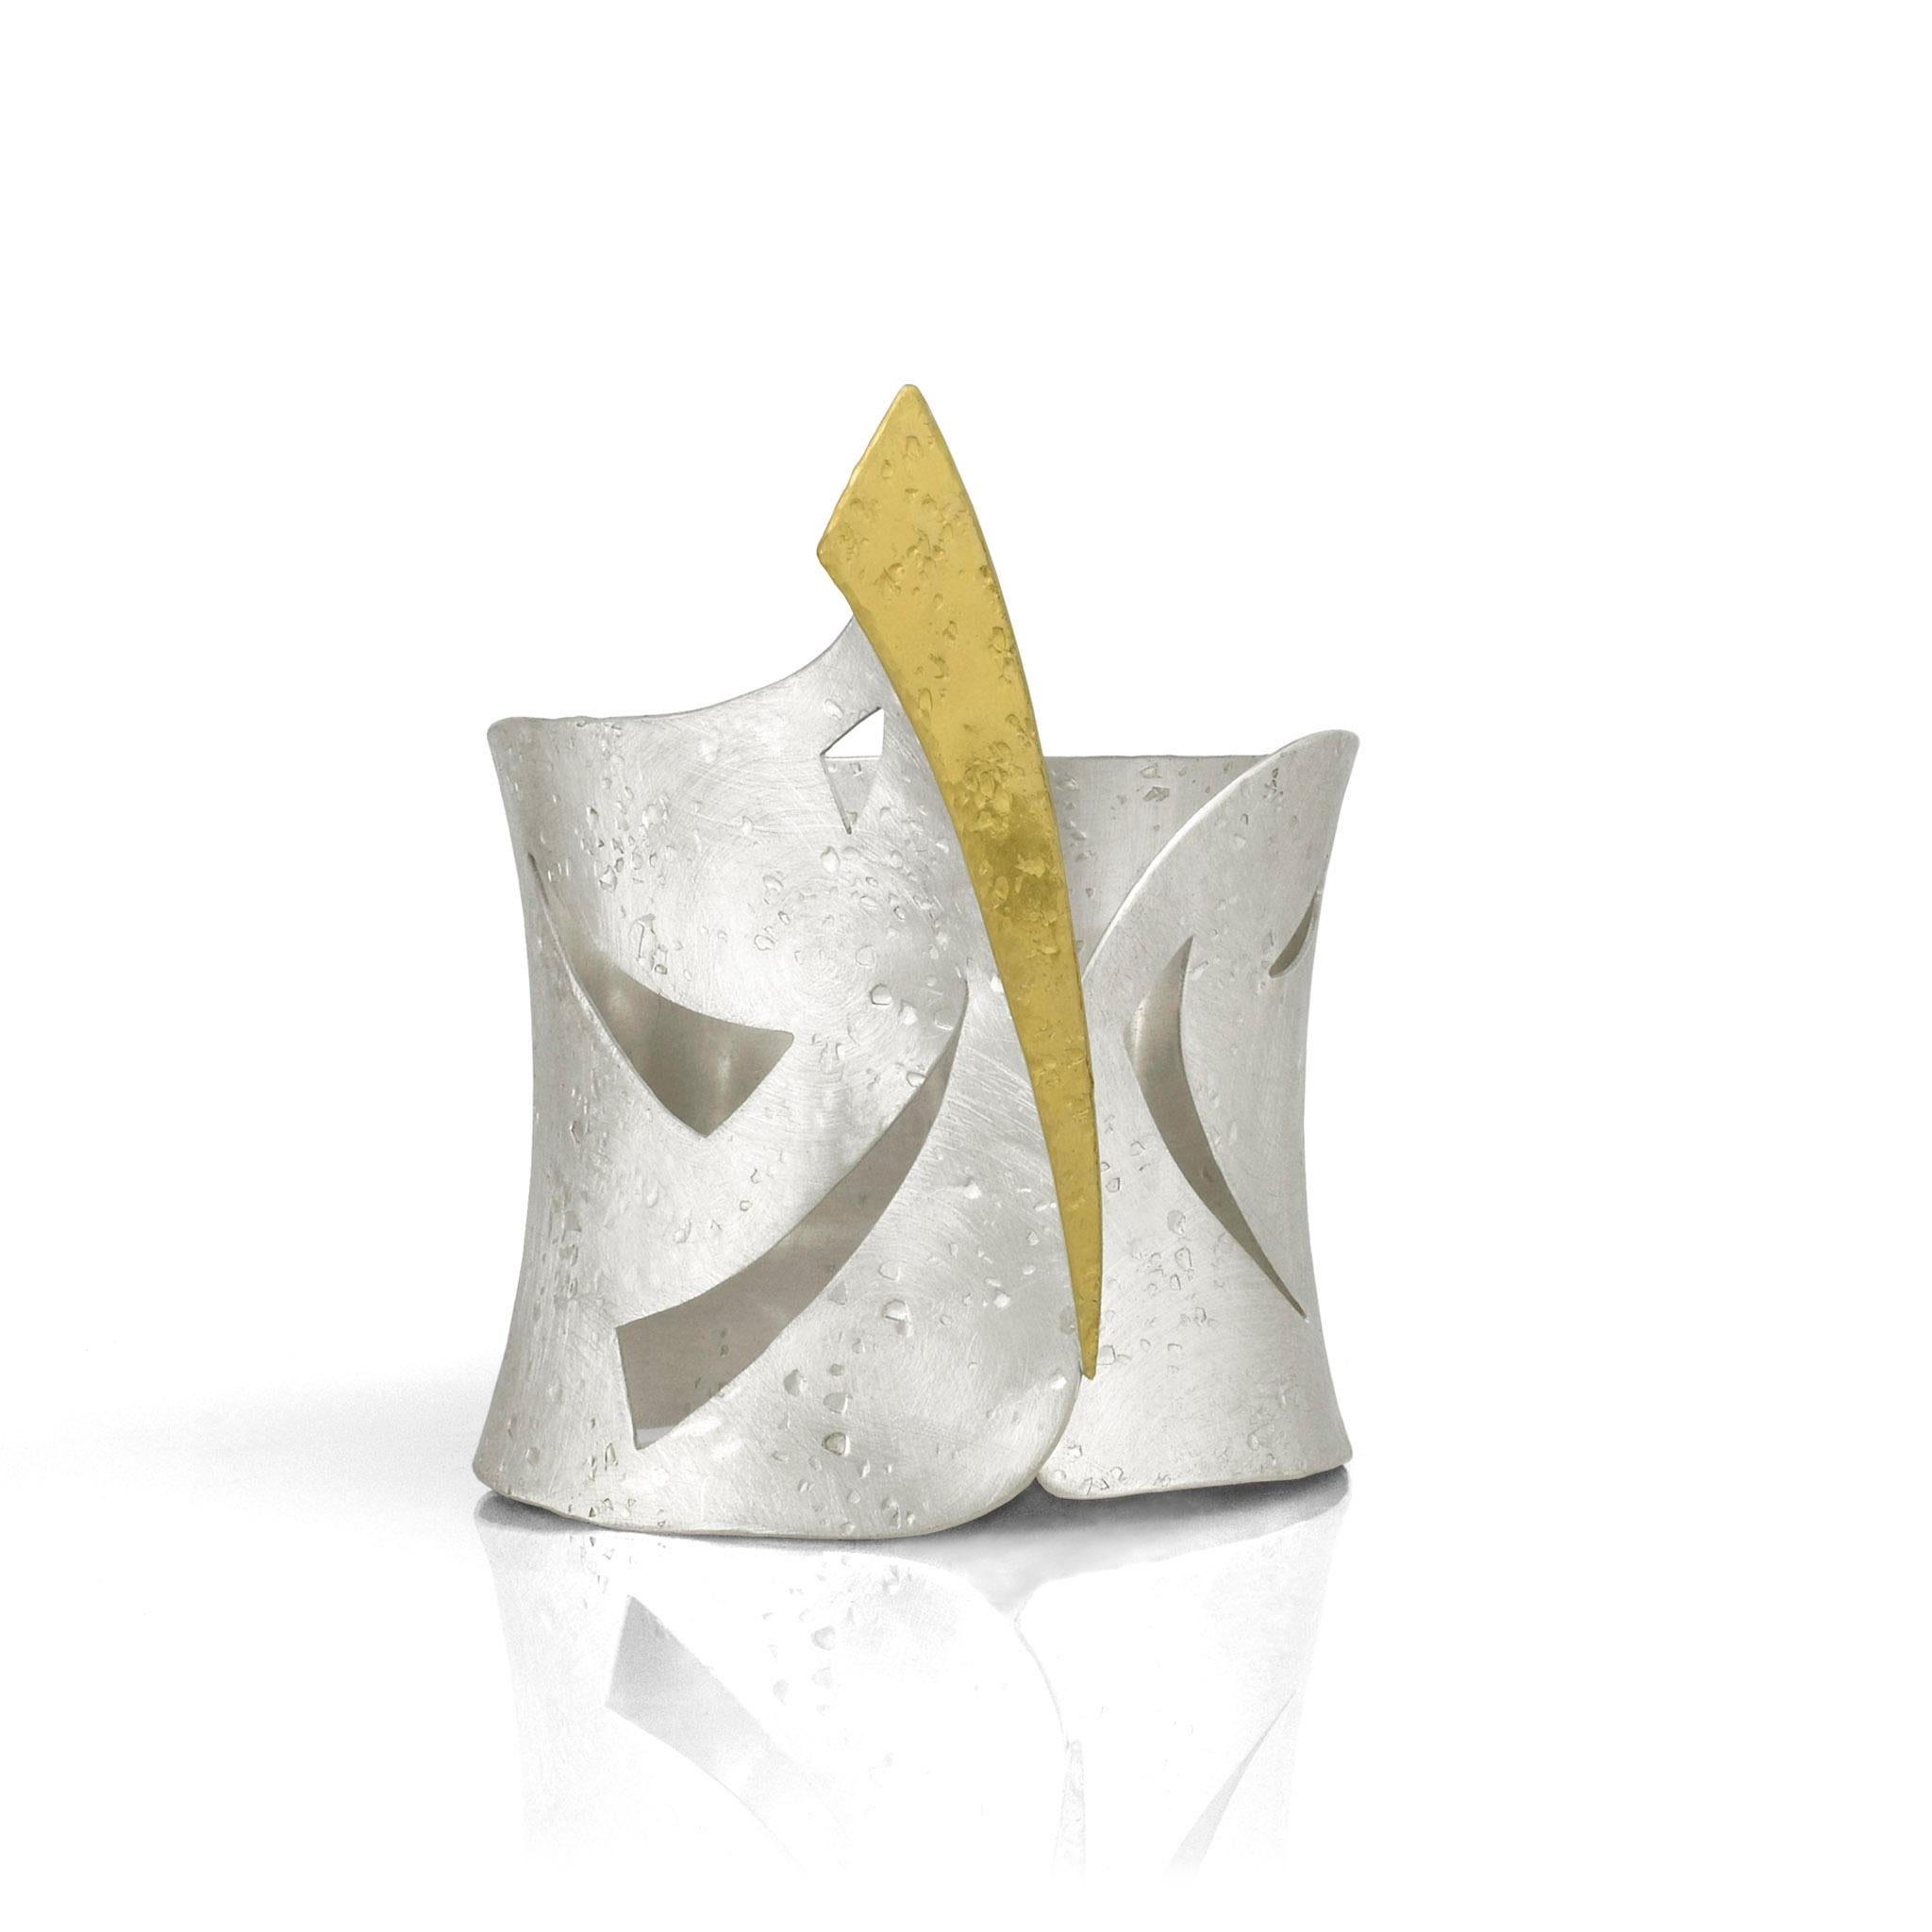 Sunray Cuff 935 Silver and 22K Gold Cuff one of a kind Sculptural Jewelry by Maria Blondet
*There is one more piece available ready to be shipped

This statement cuff is a beautiful example of balance within the shapes. Instead of creating stark